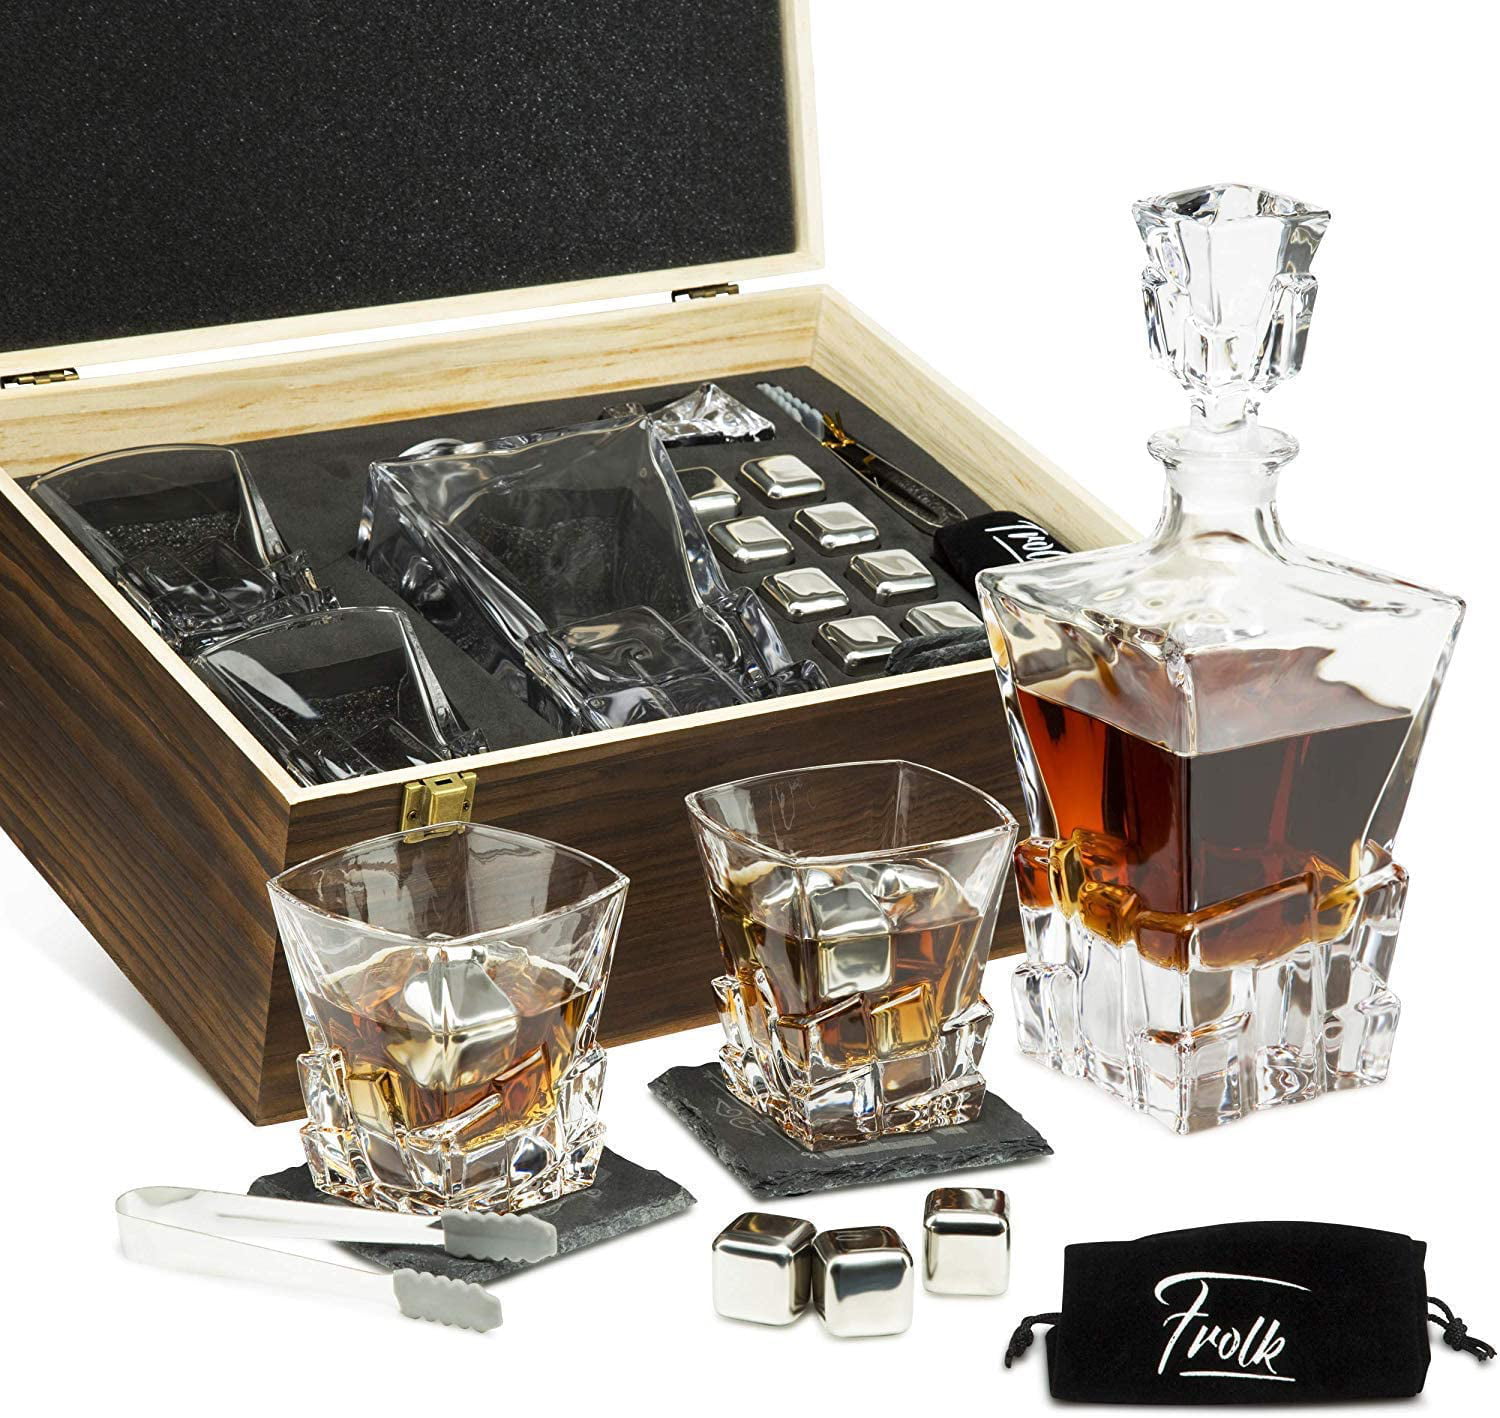 Premium Whiskey Stones Gift Set for Men Slate Stone Coasters 2 Bases 2 Chilling Stainless-Steel Swizzle Sticks Pouch Tongs 2 Whiskey Glasses 11 oz A Luxury Set in a Real Pinewood Box 